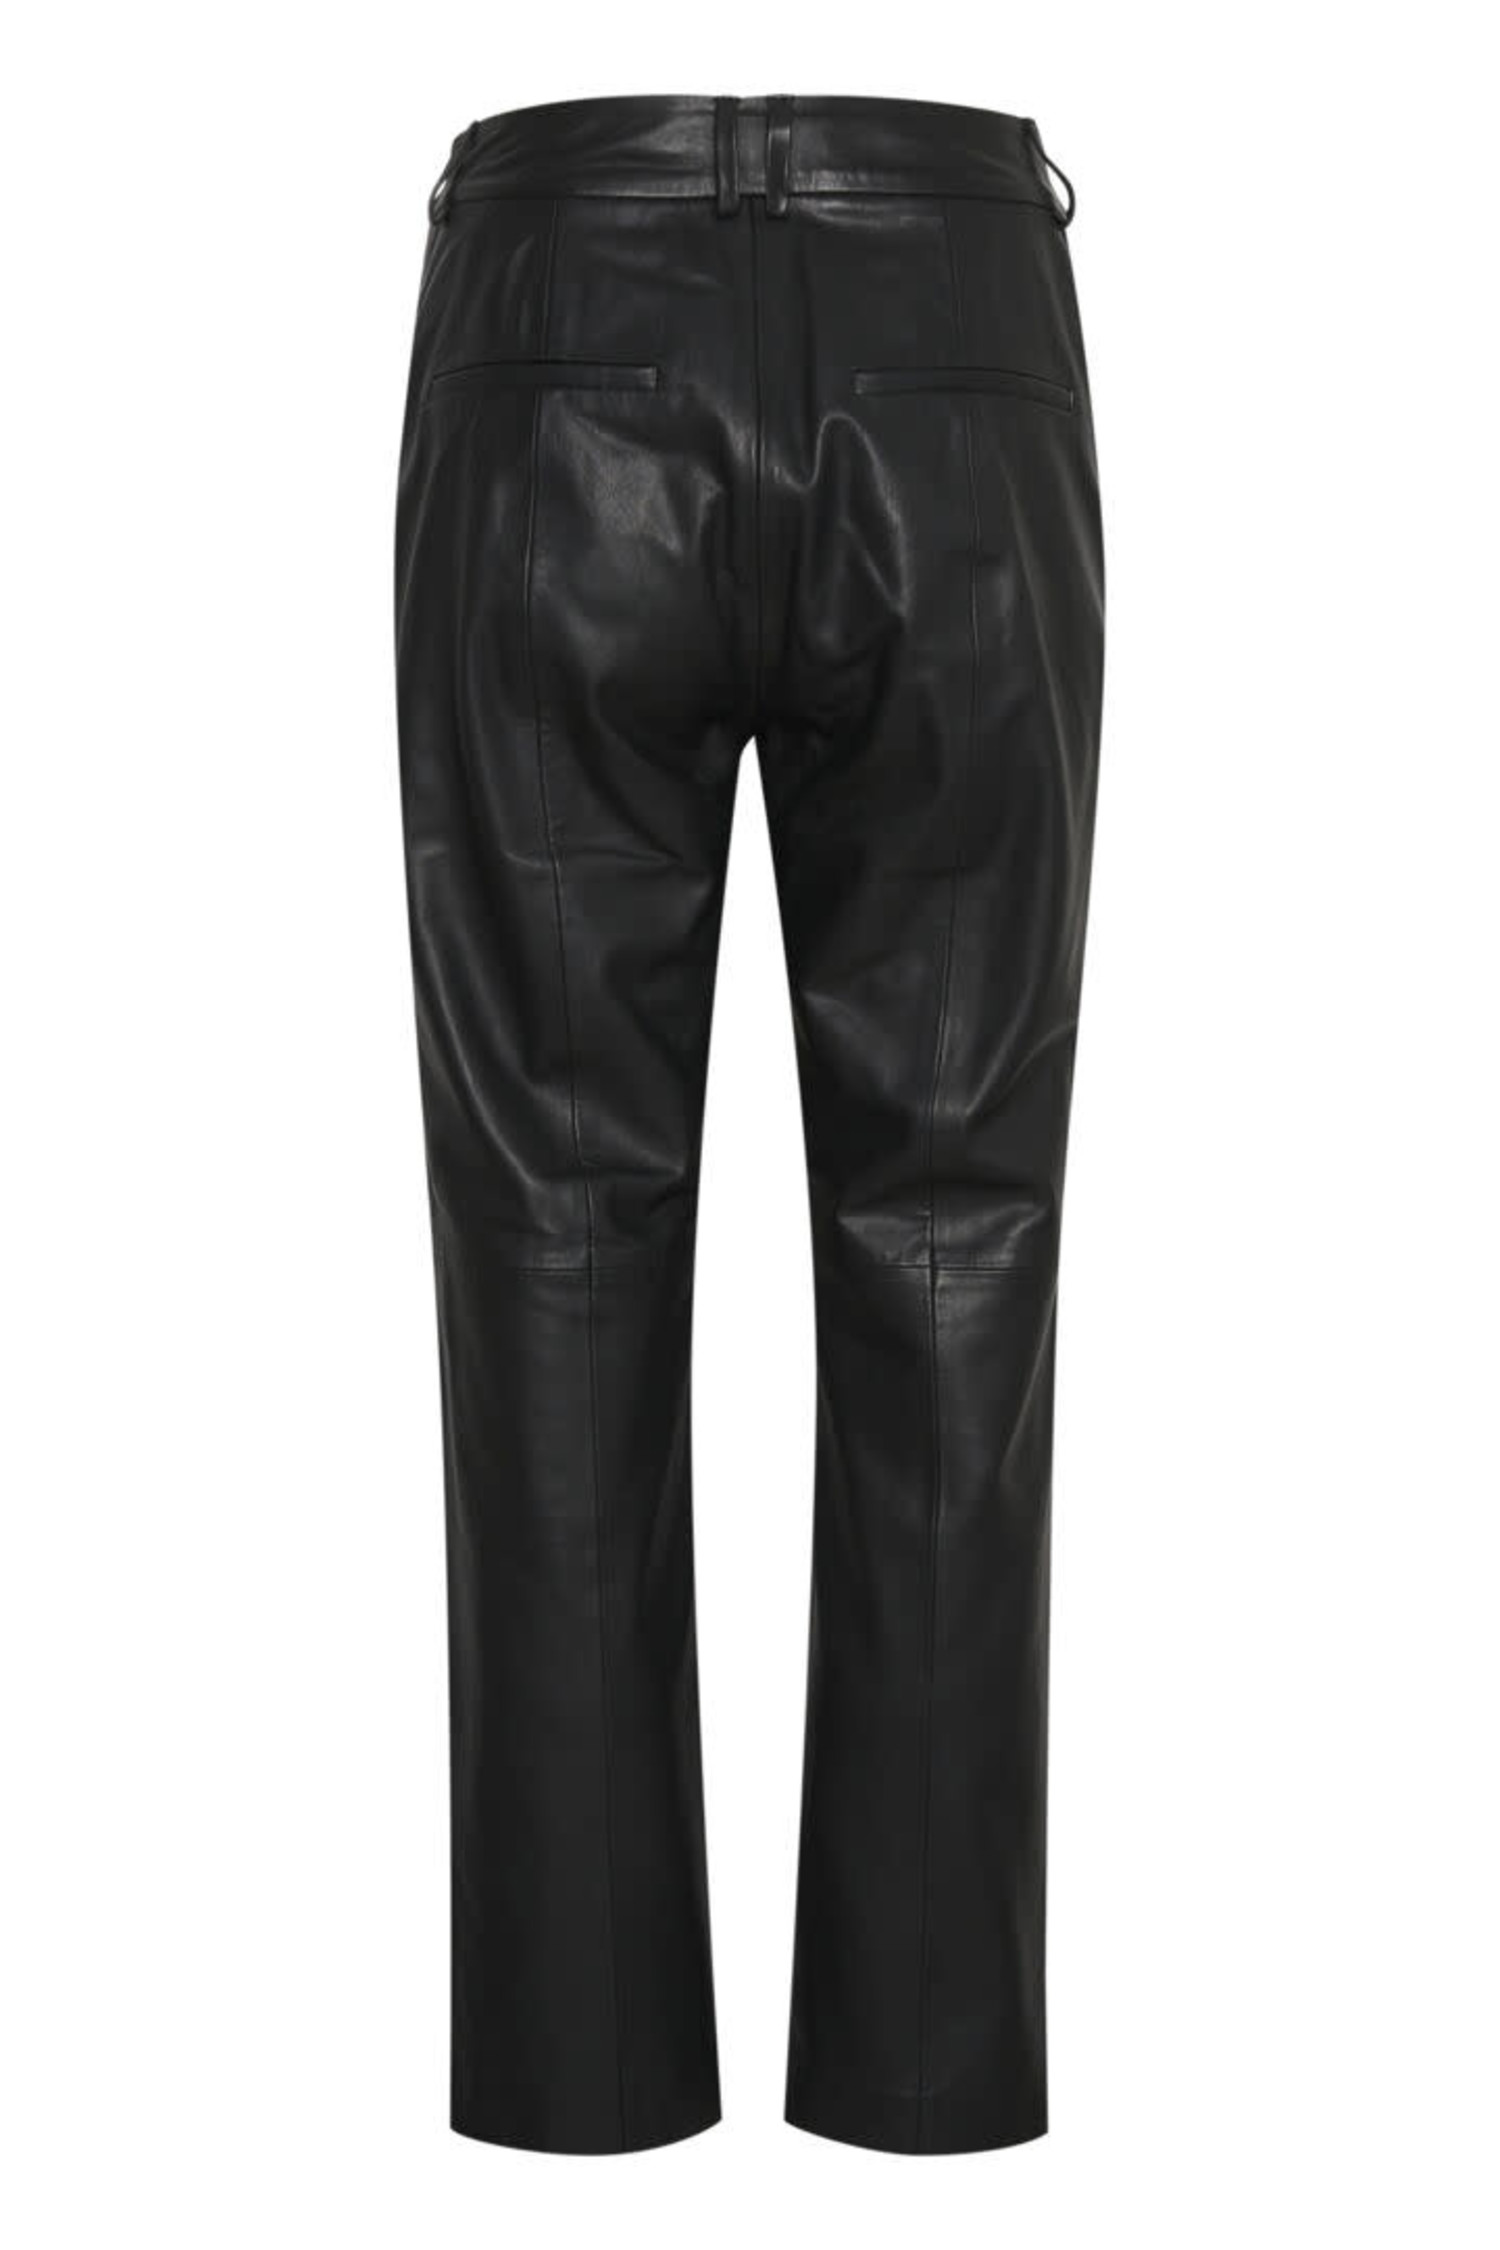 InWear  Wook Leather Trouser Black - Tryst Boutique